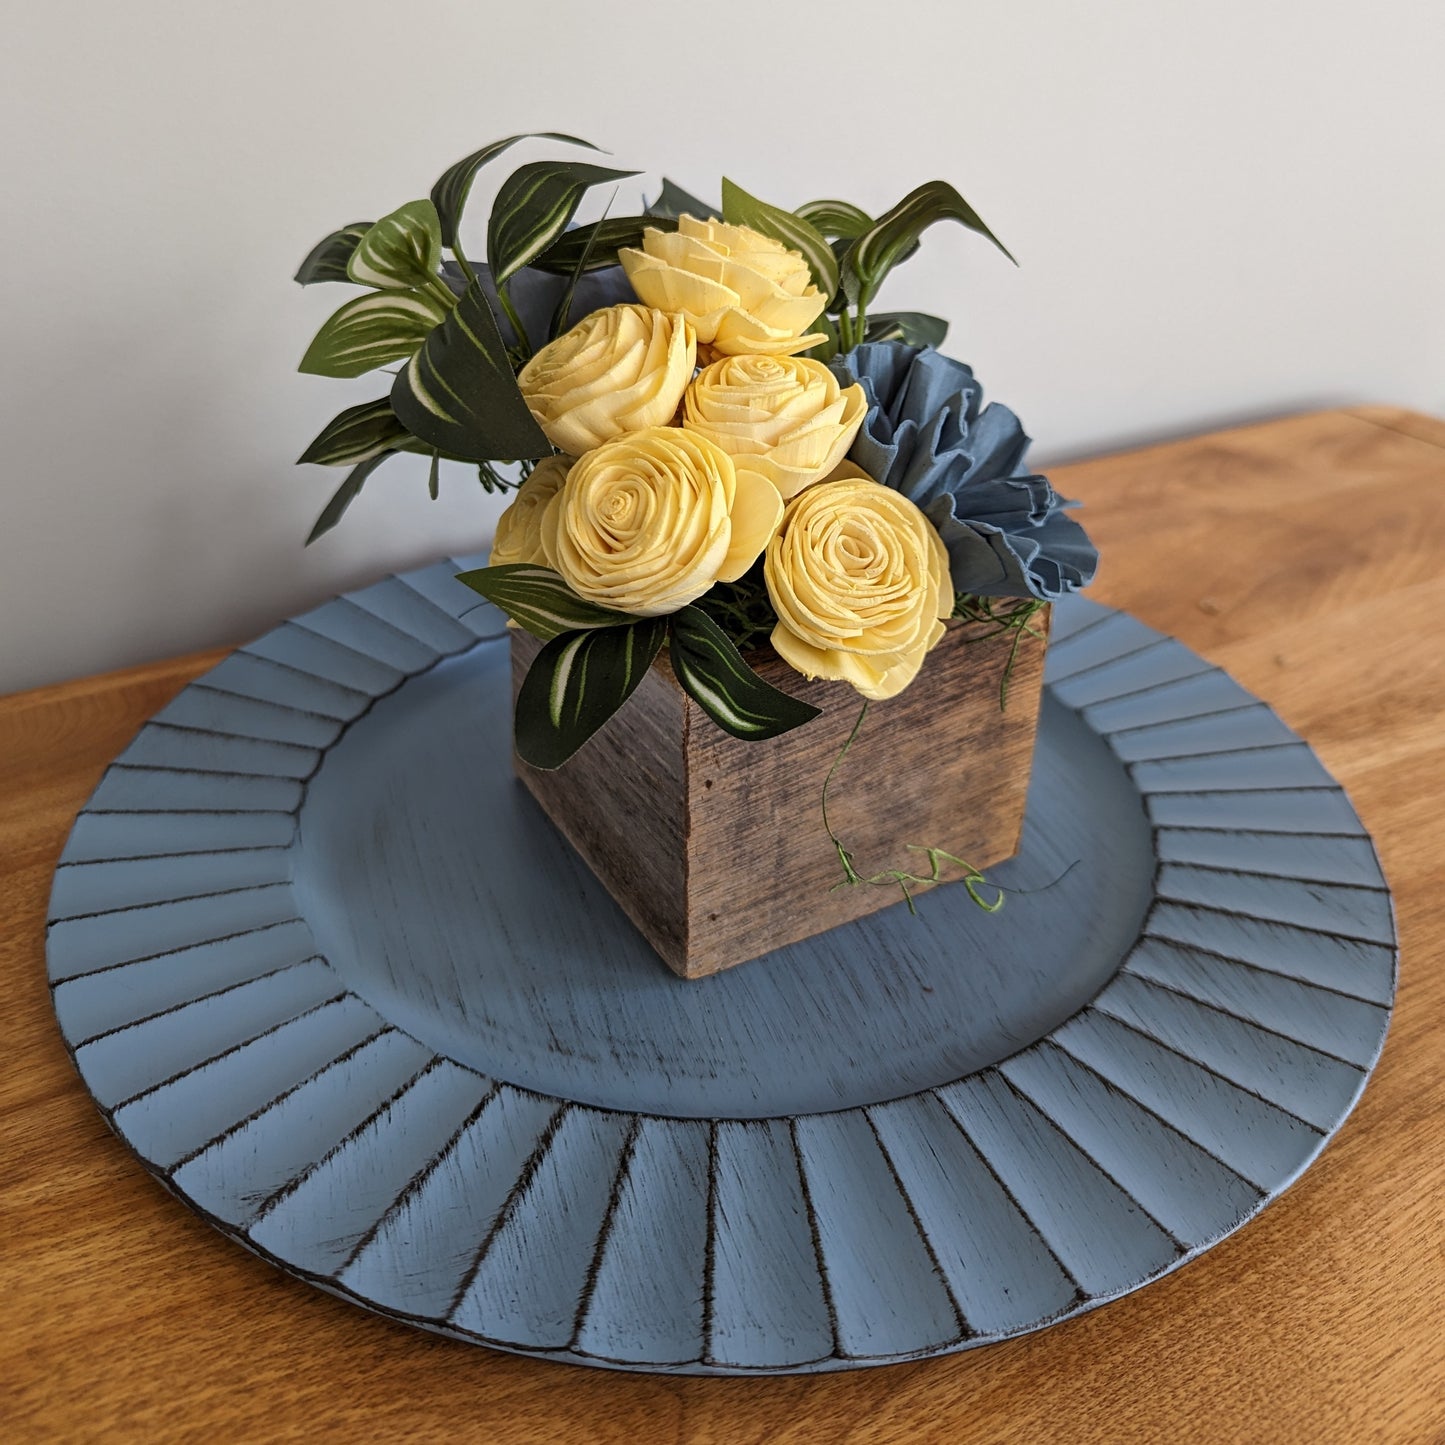 Wood Flower Arrangement for Peace: Soothing Tones and Gentle Beauty